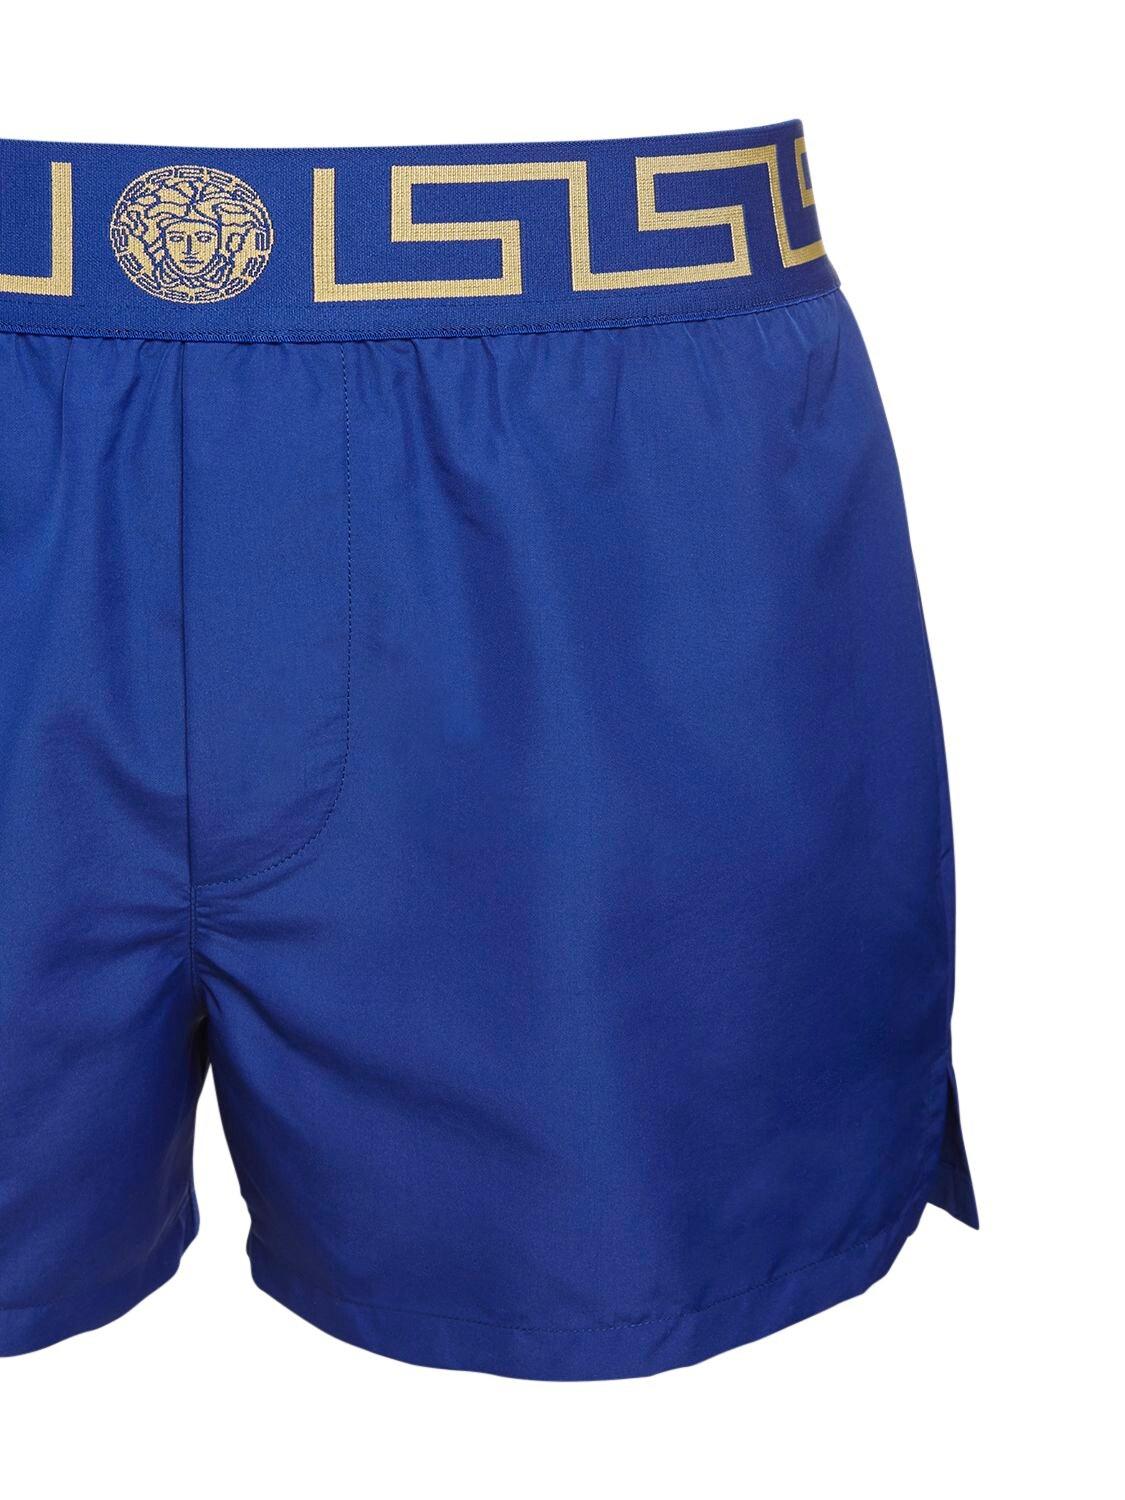 Versace Swim Shorts With Logo in Blue/Gold (Blue) for Men - Save 